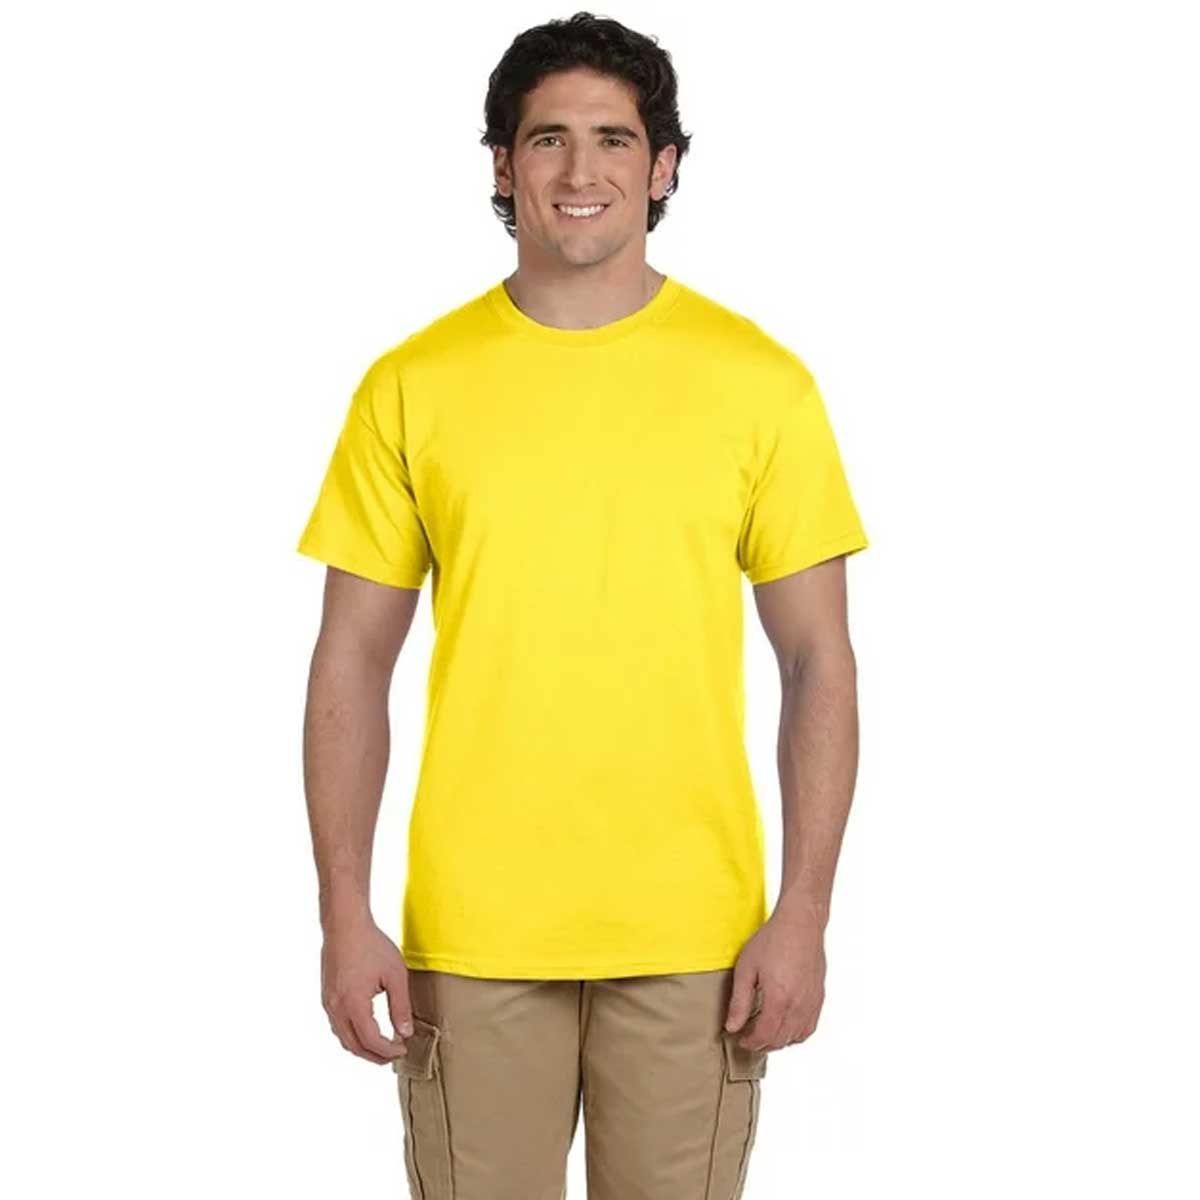 Promotional T Shirts Manufacturers in Canada